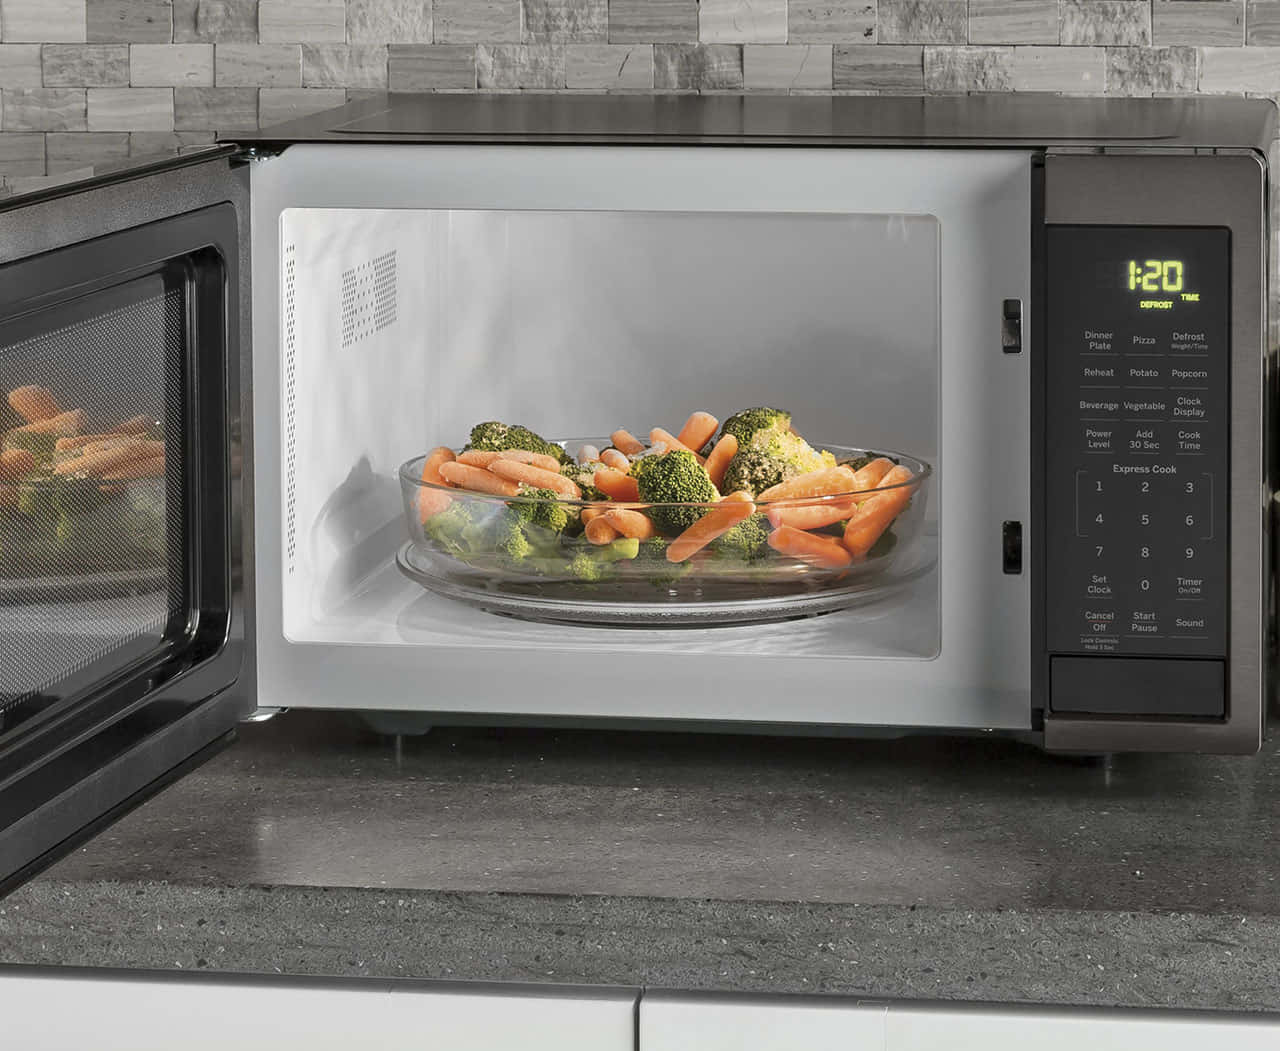 Cook food quickly with a modern microwave